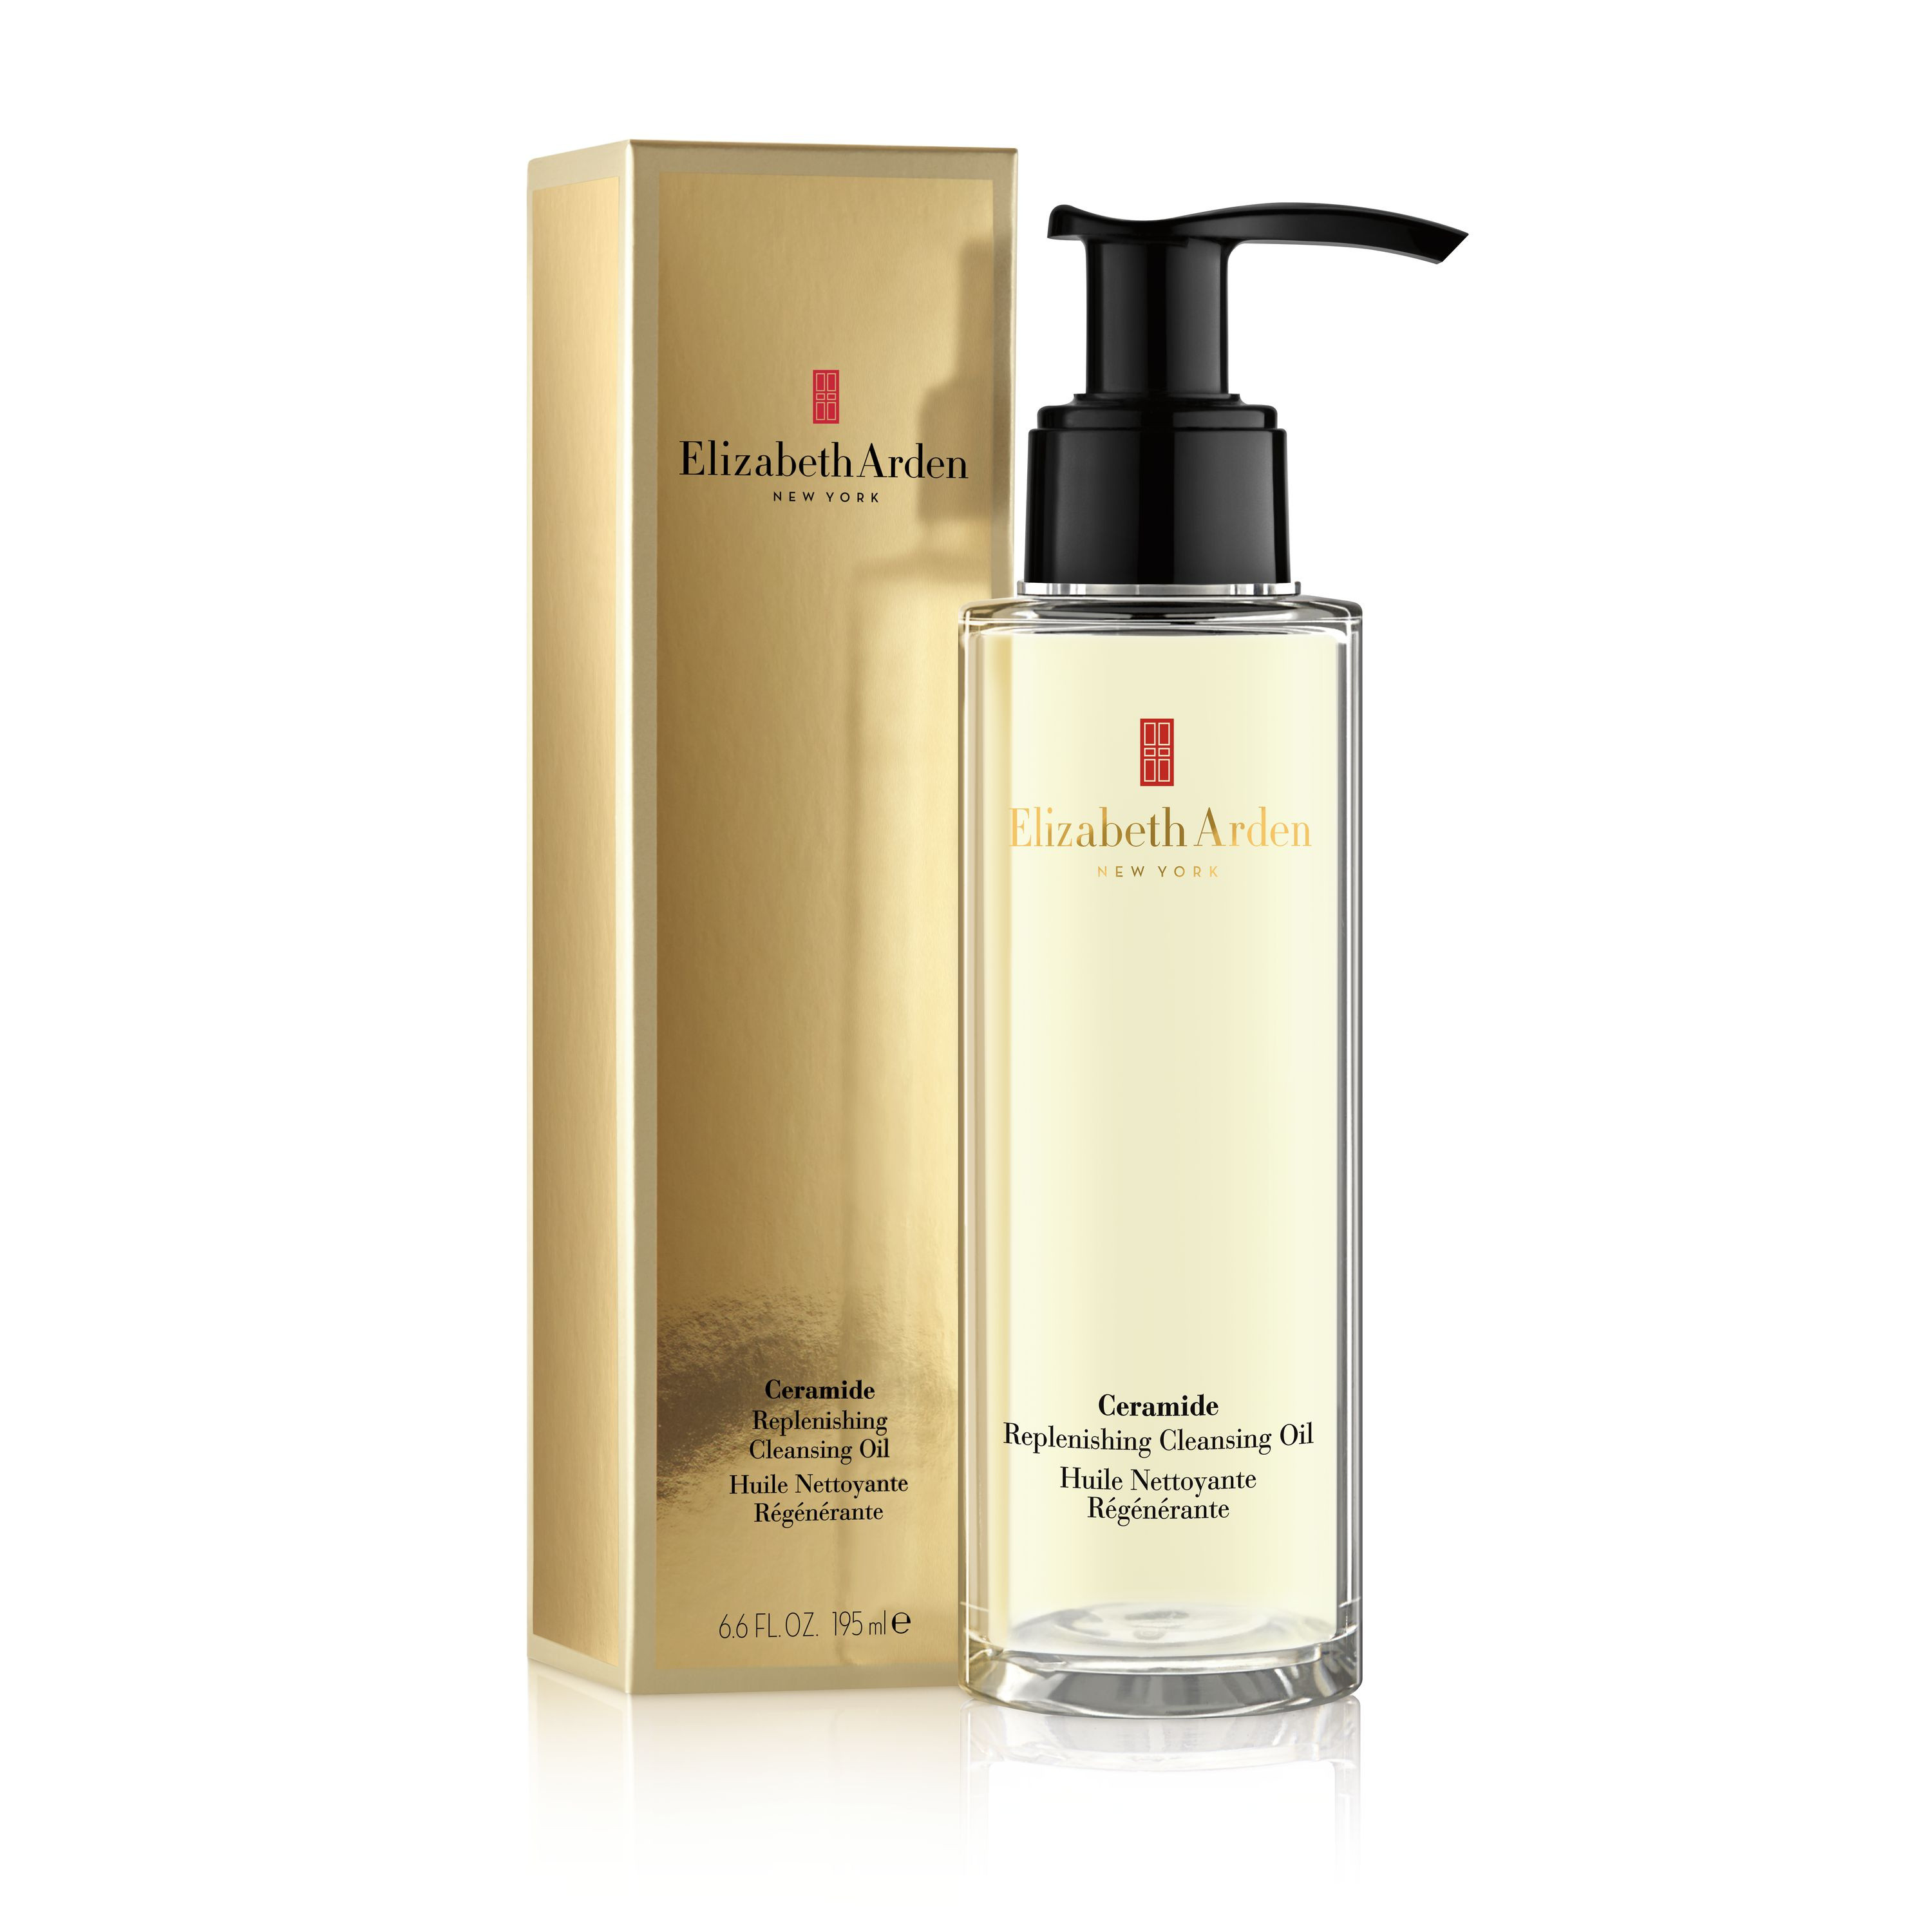 Ceramide replenishing cleansing oil 200 ml, Giallo oro, large image number 0